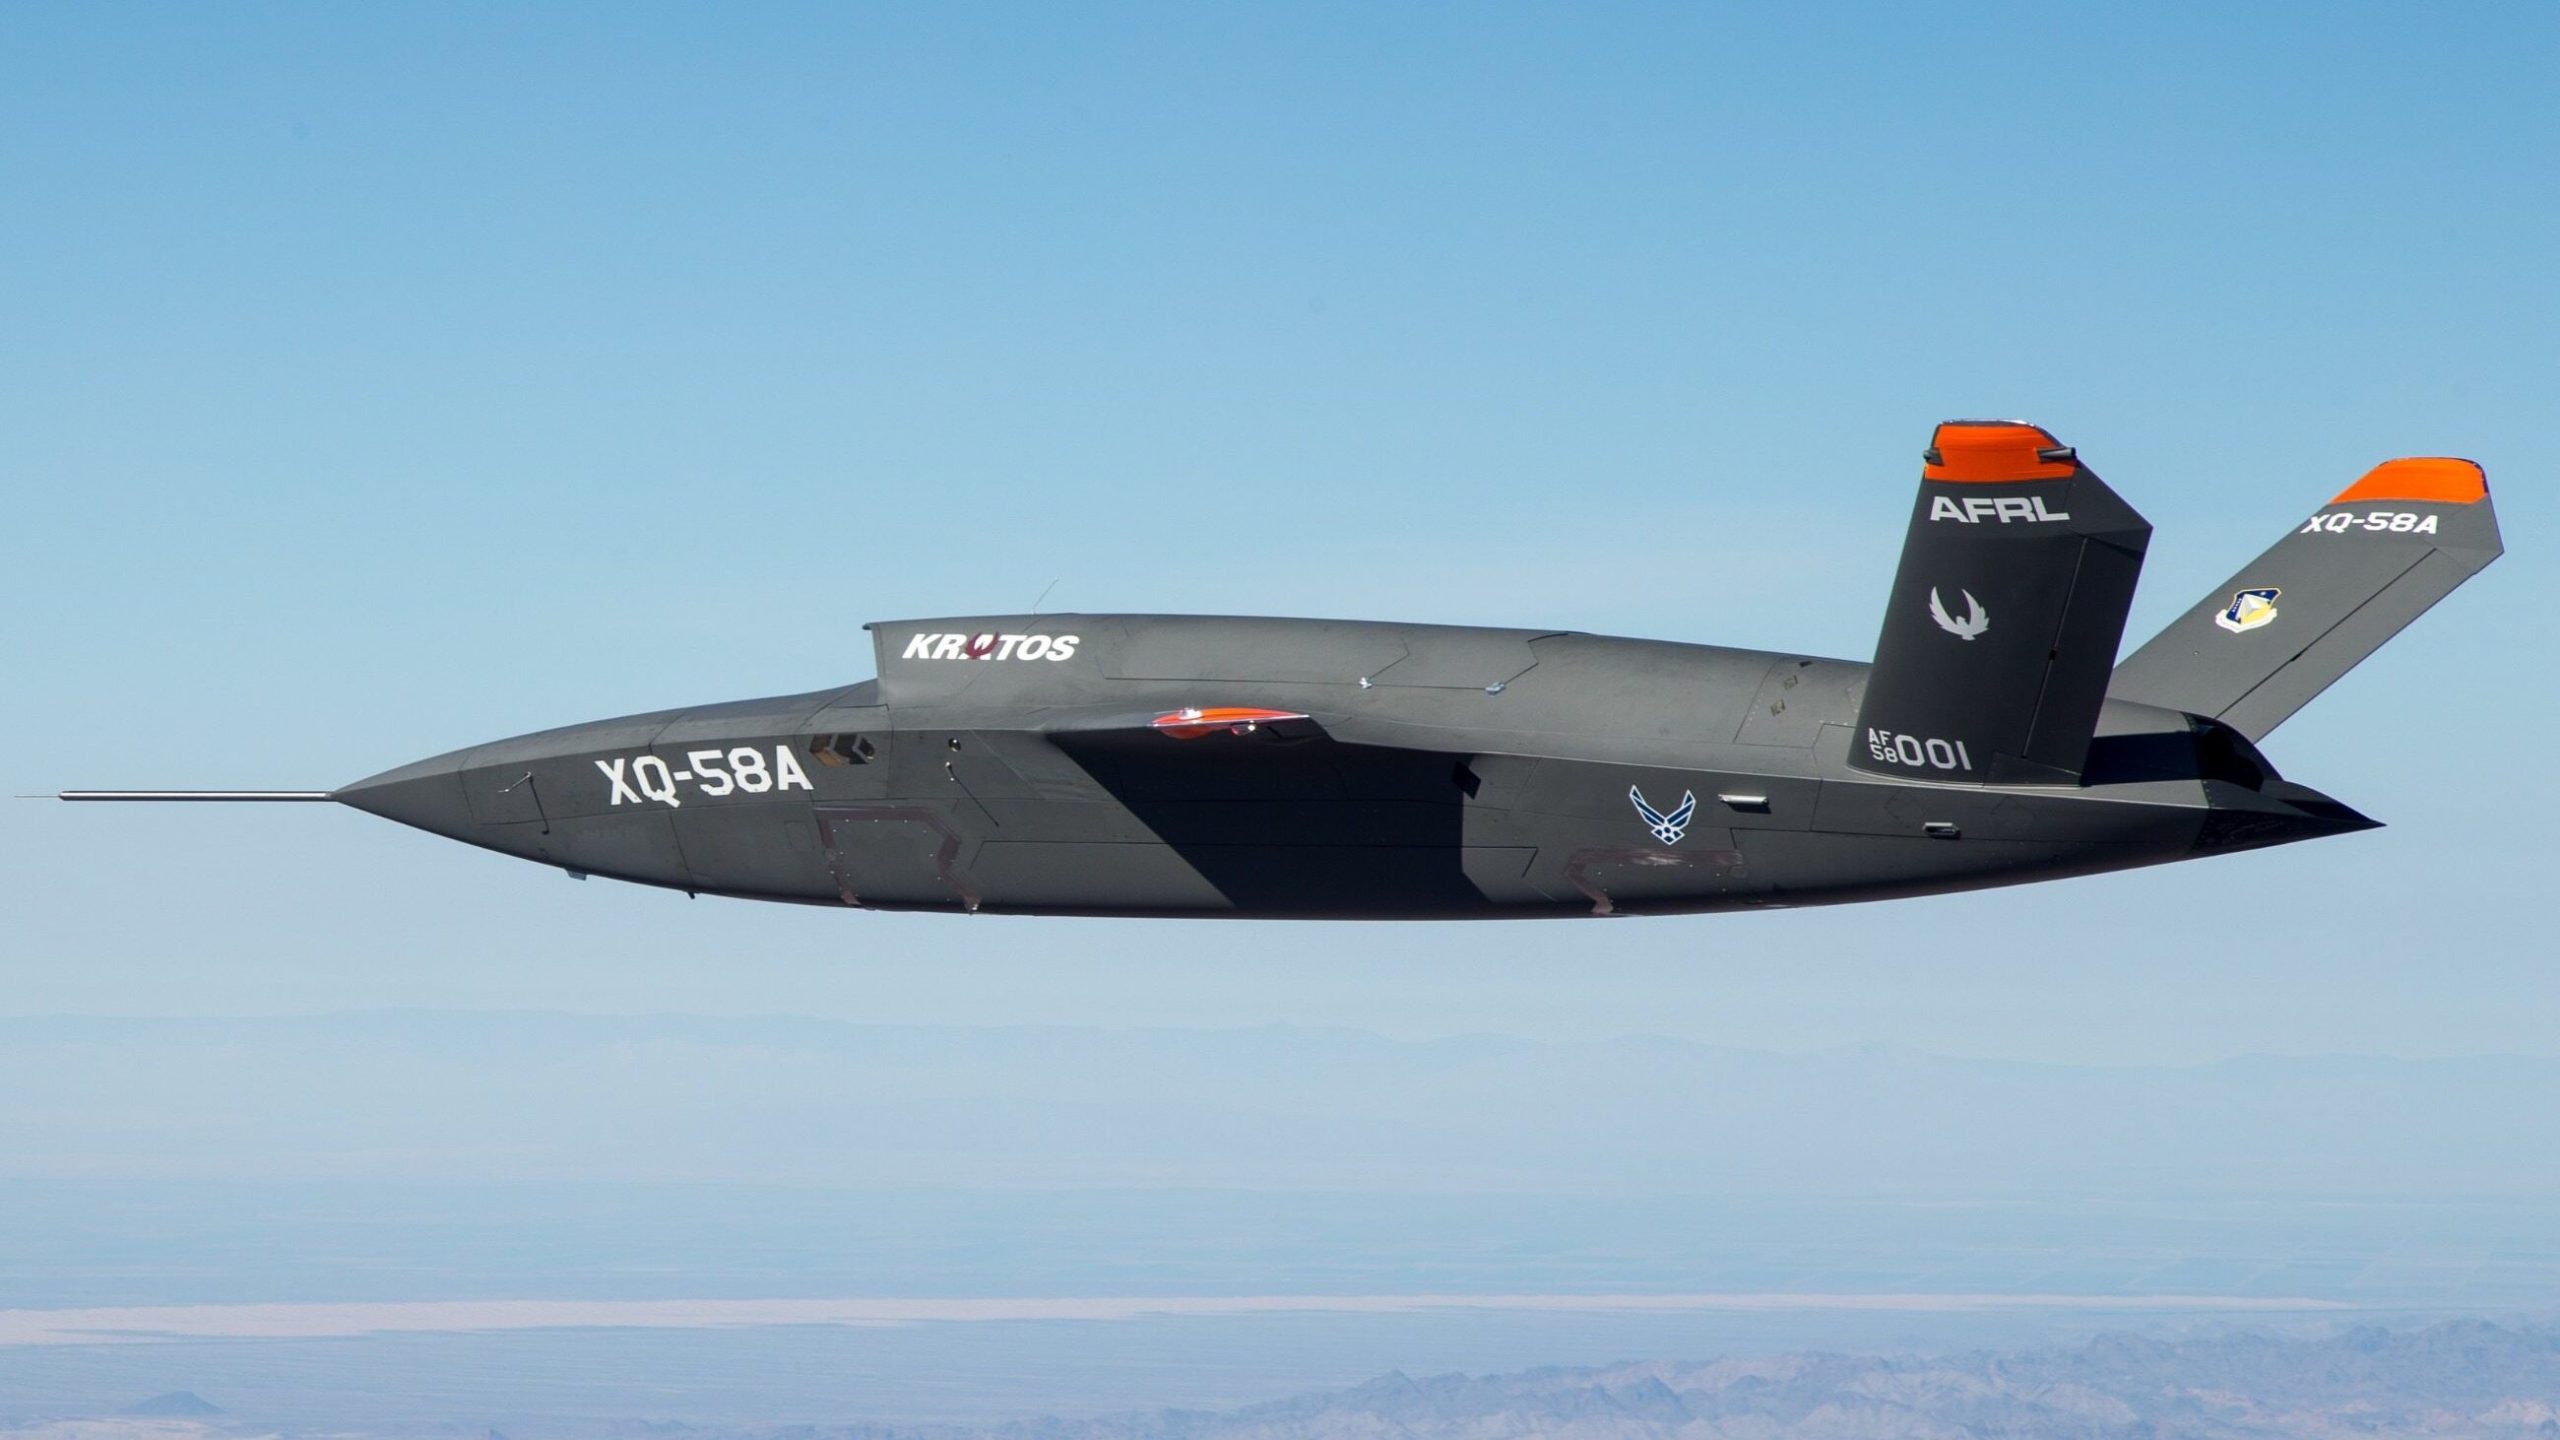 The first such flight in history.  The US military tested an AI combat drone